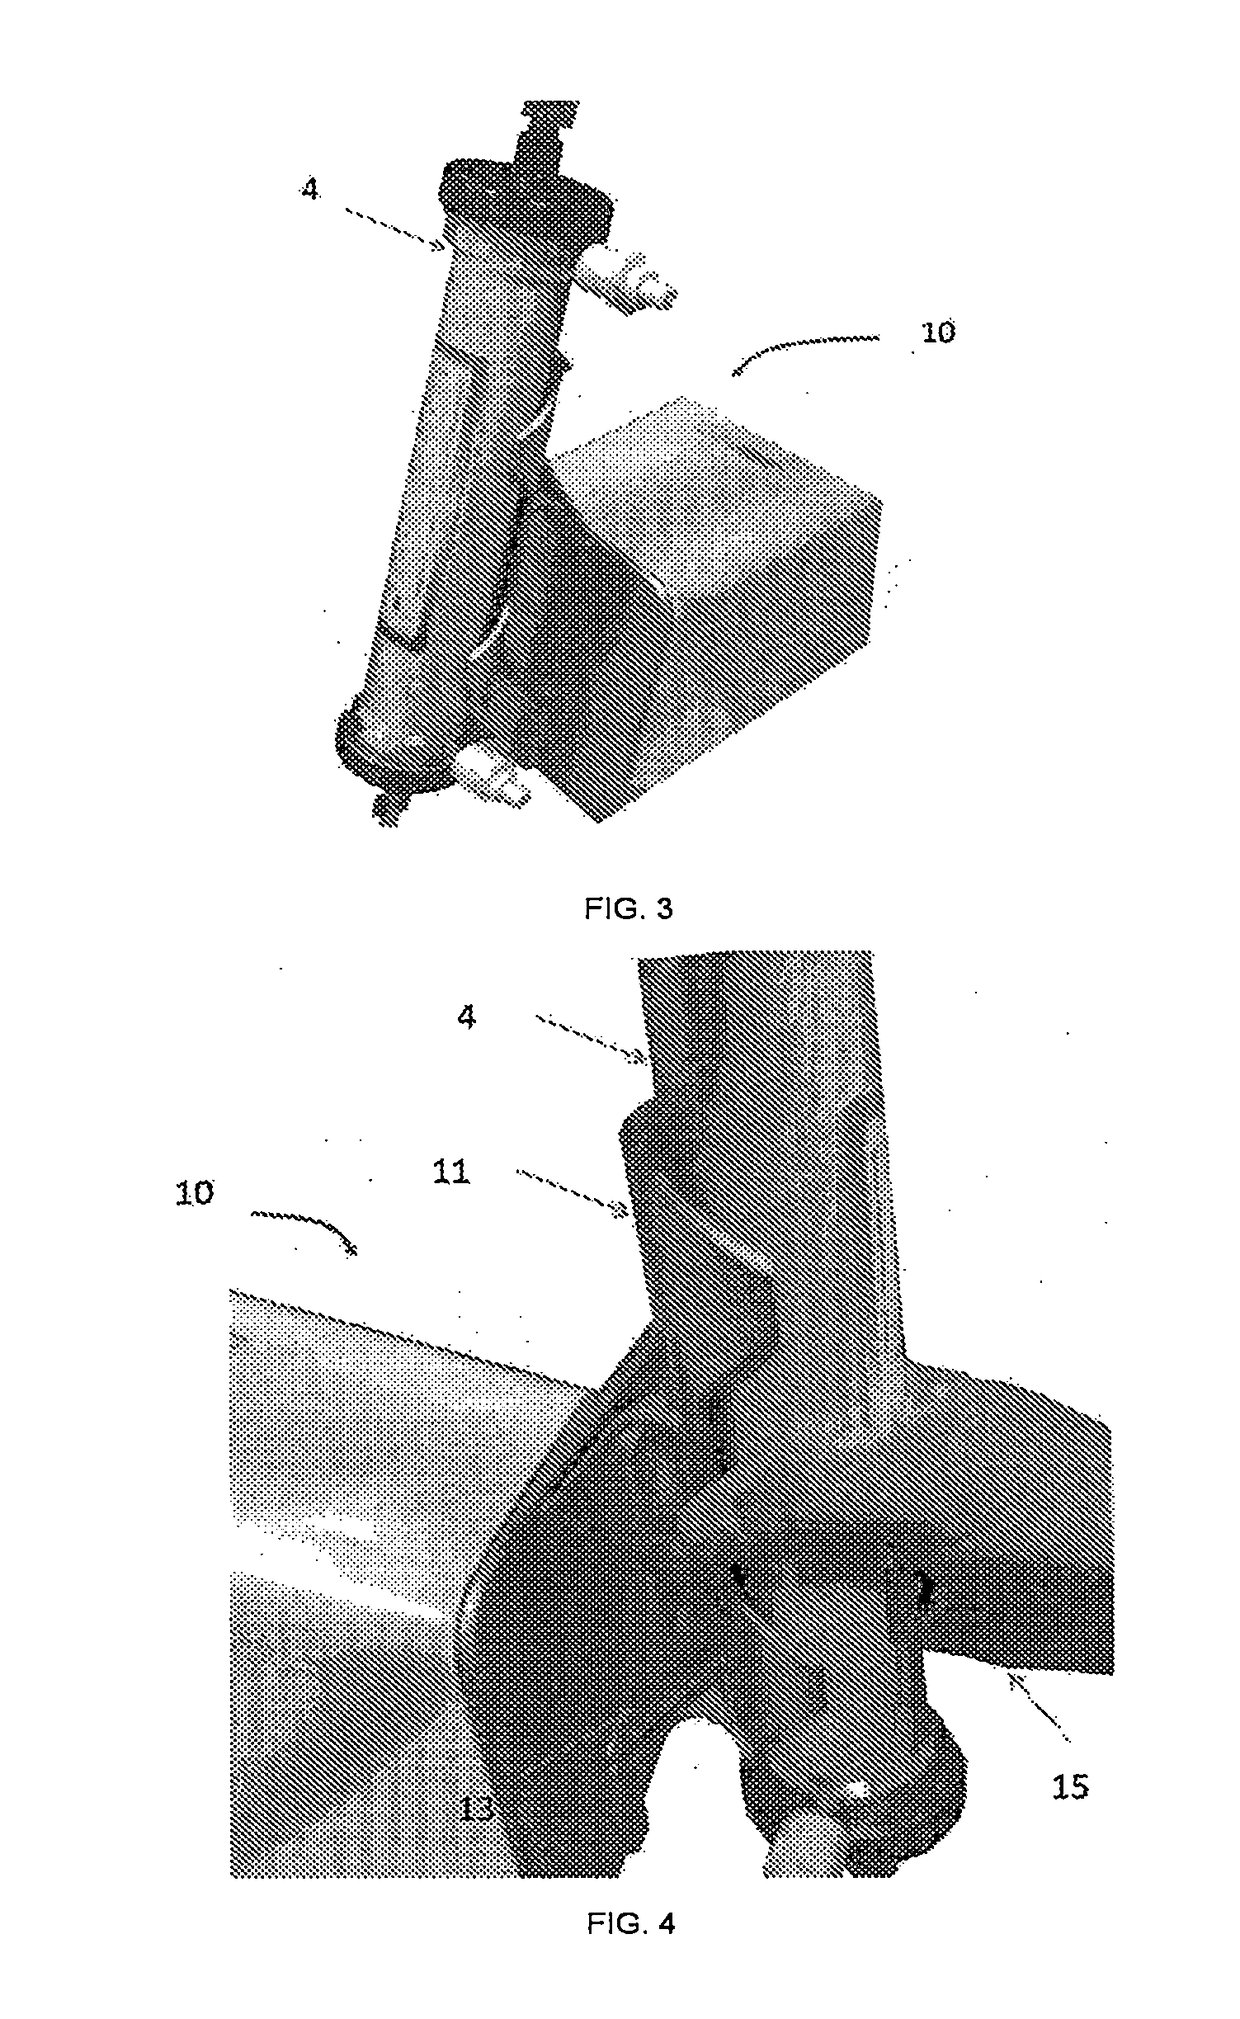 Handle for a Medical Device